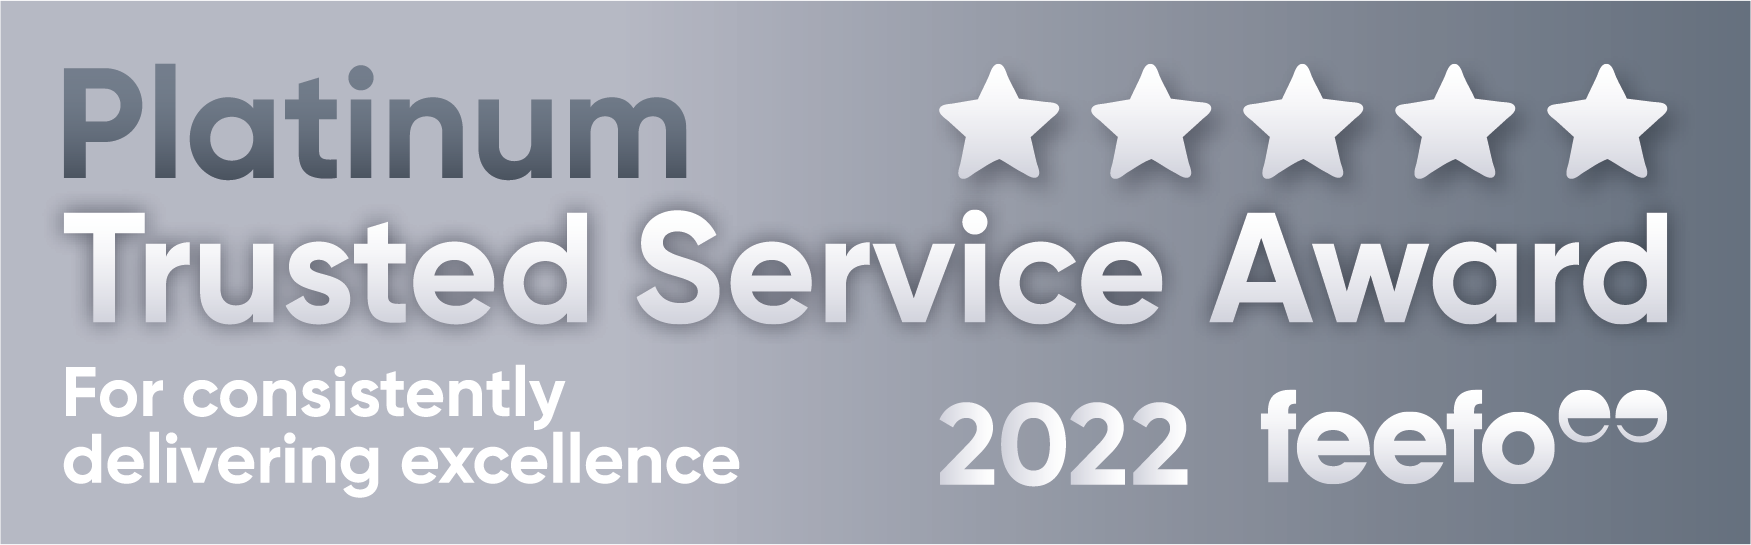 2022 Feefo Platinum Trusted Service Award  5 stars for consistently delivering excellence